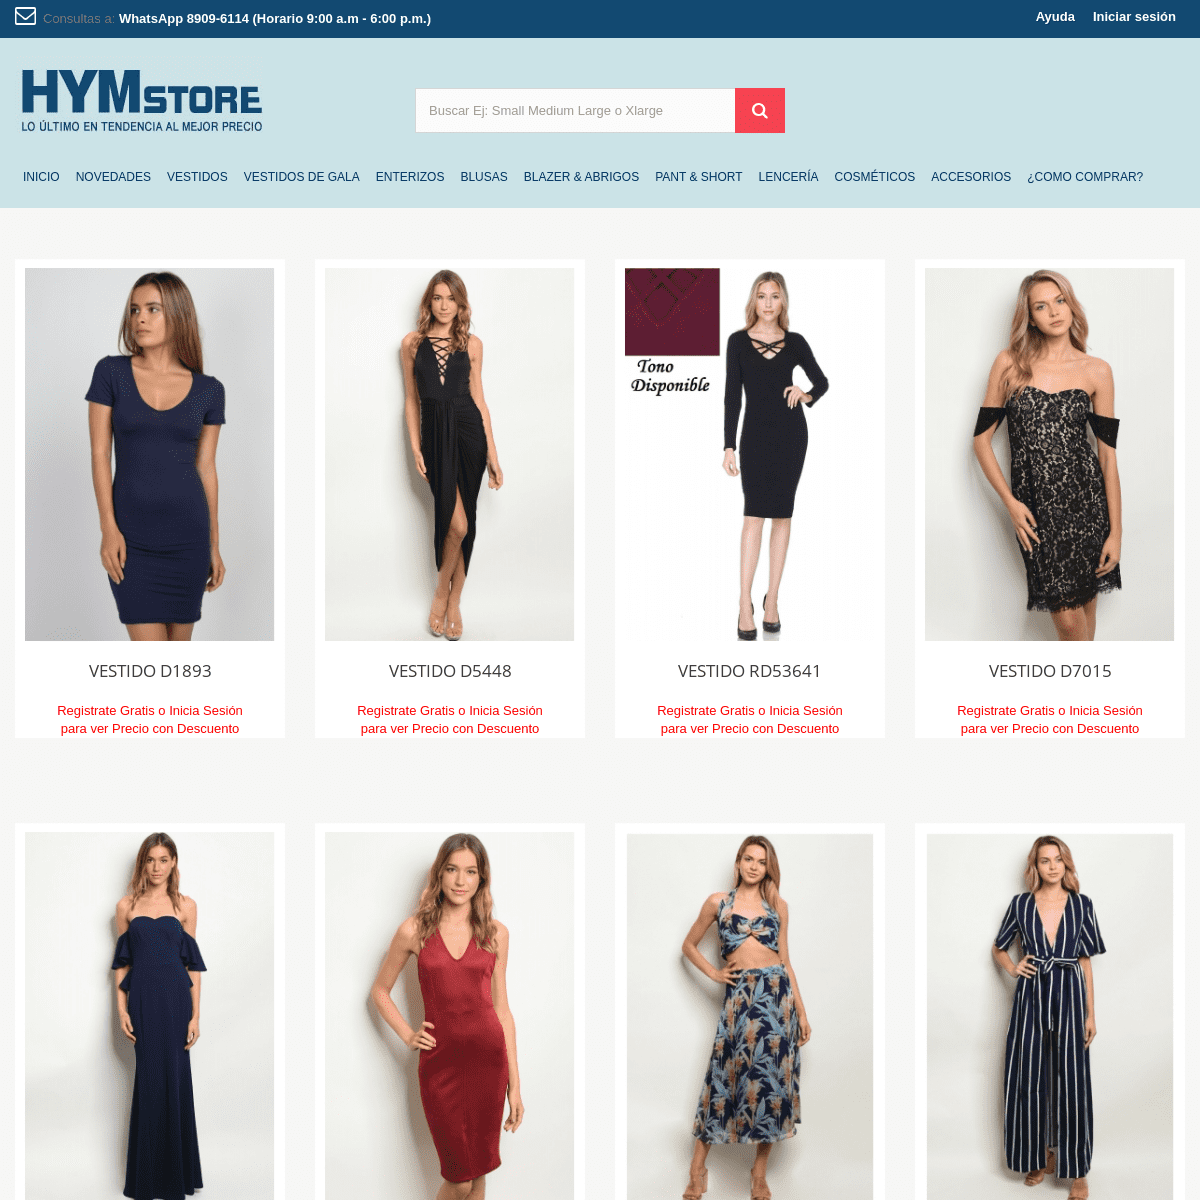 A complete backup of hymstore.com